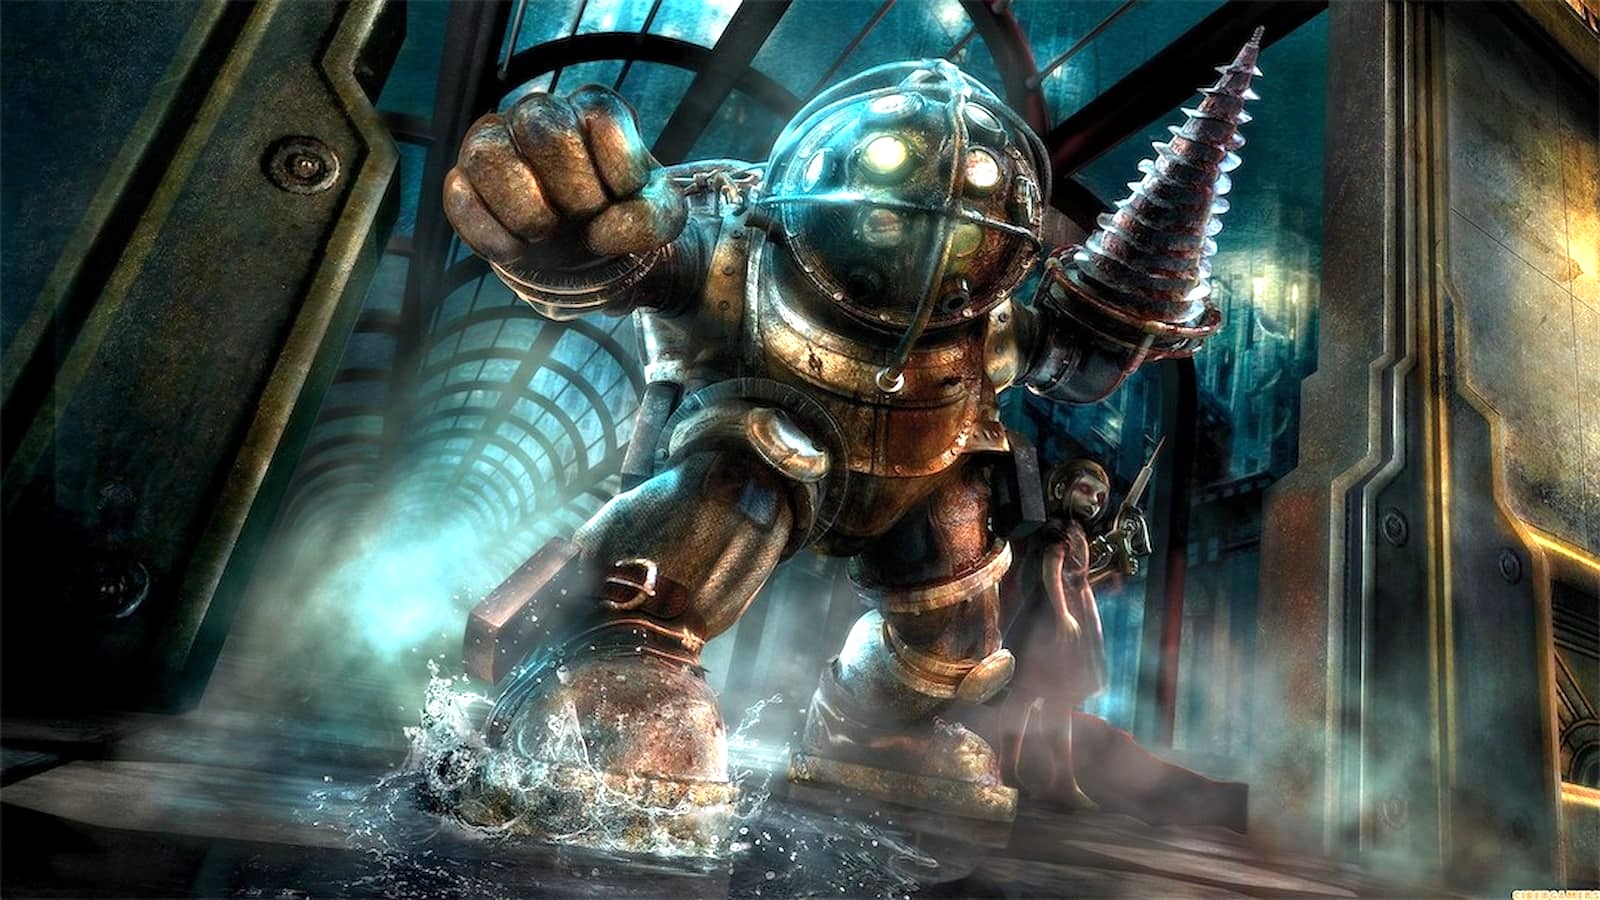 BioShock Collection with a Big Daddy and Little Sister